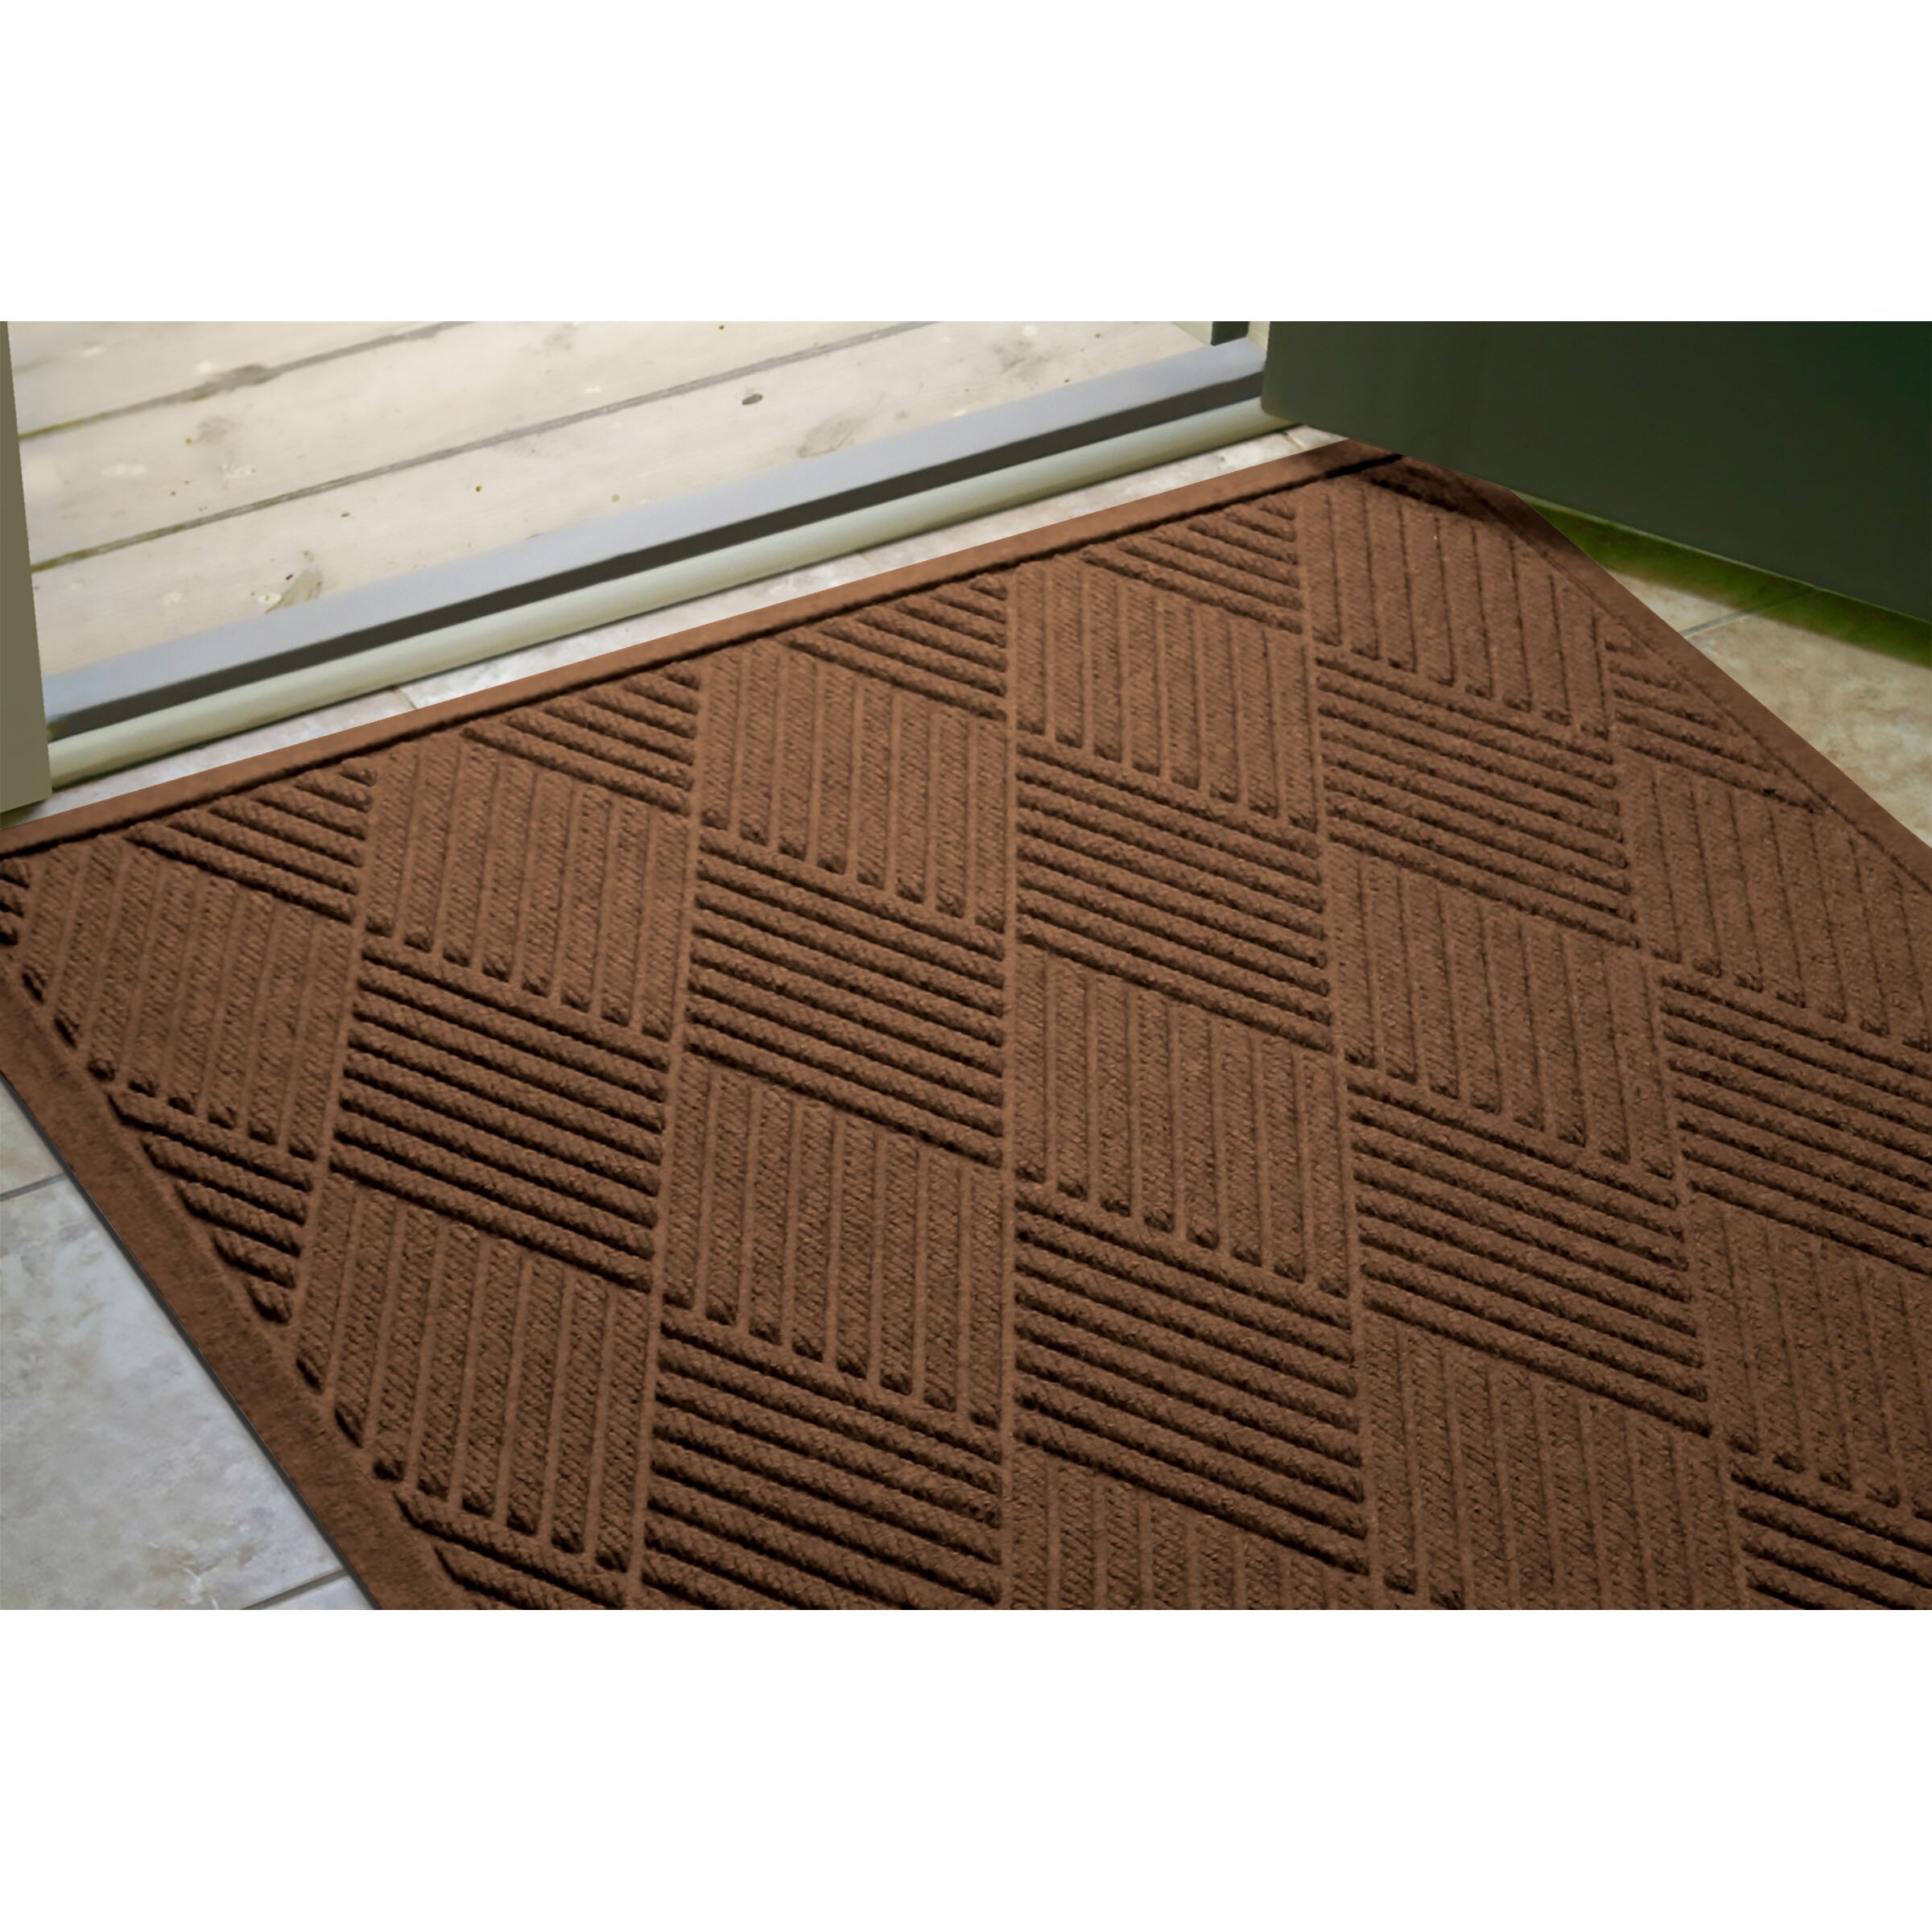 Bungalow Flooring Waterhog Indoor/Outdoor Boot Tray, 15 by 36 inches, Made  in USA, Skid Resistant, Easy to Clean, Catches Water and Debris, Chevron